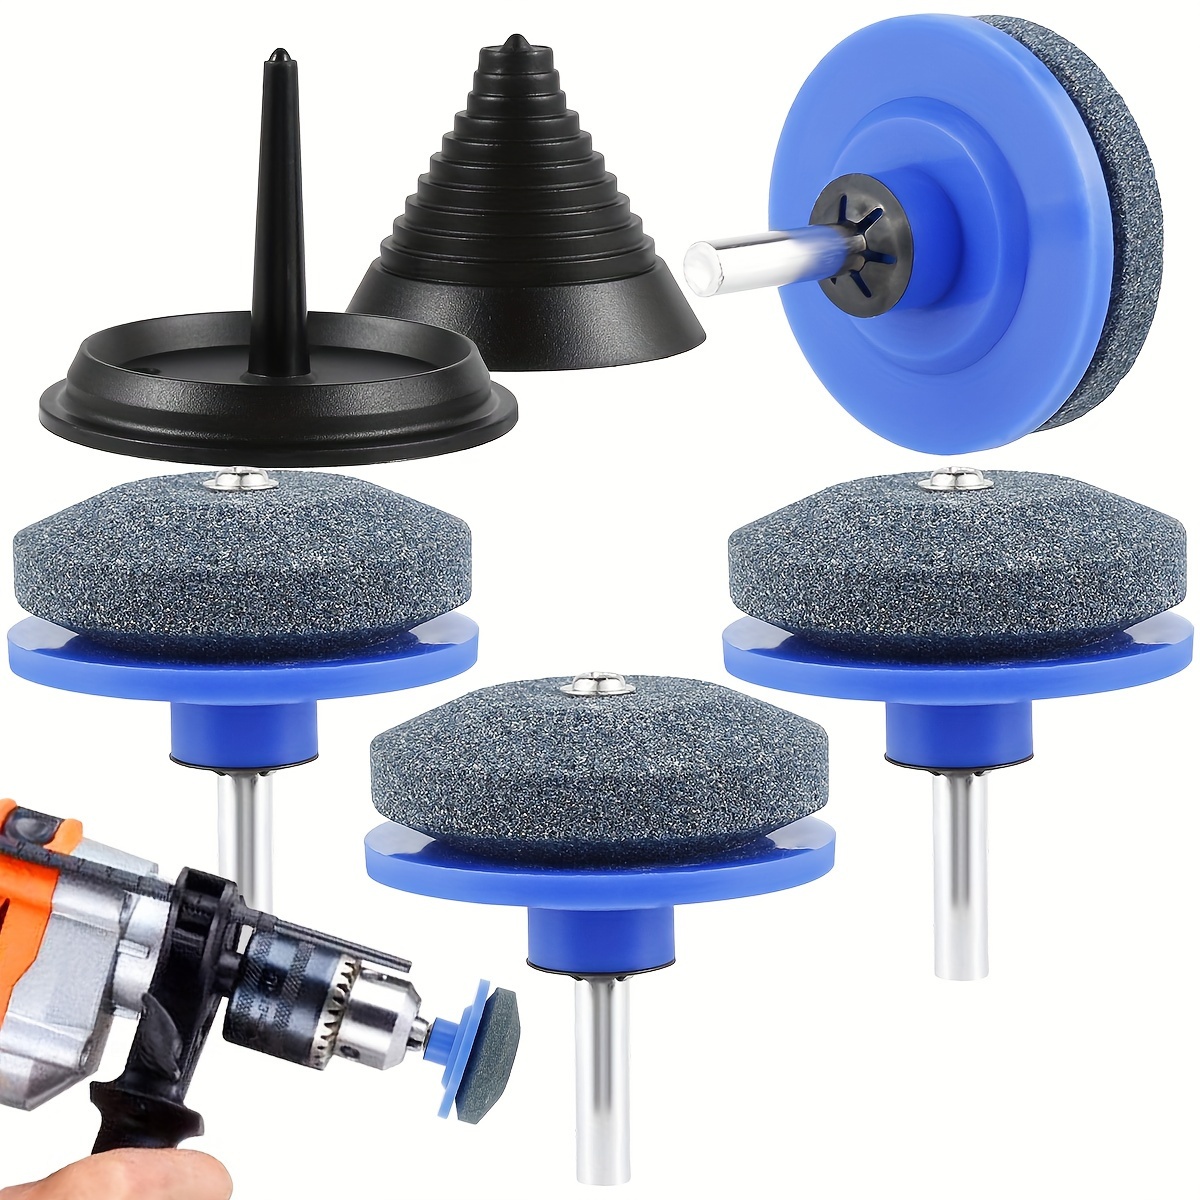 

5 Pcs Lawn Mower Blade Sharpener Reusable Sharp Wear Resistant Grinder Wheel Stone With Blade Balancer Drill Attachment Grinding Accessories For Most Power Drill Hand Drill